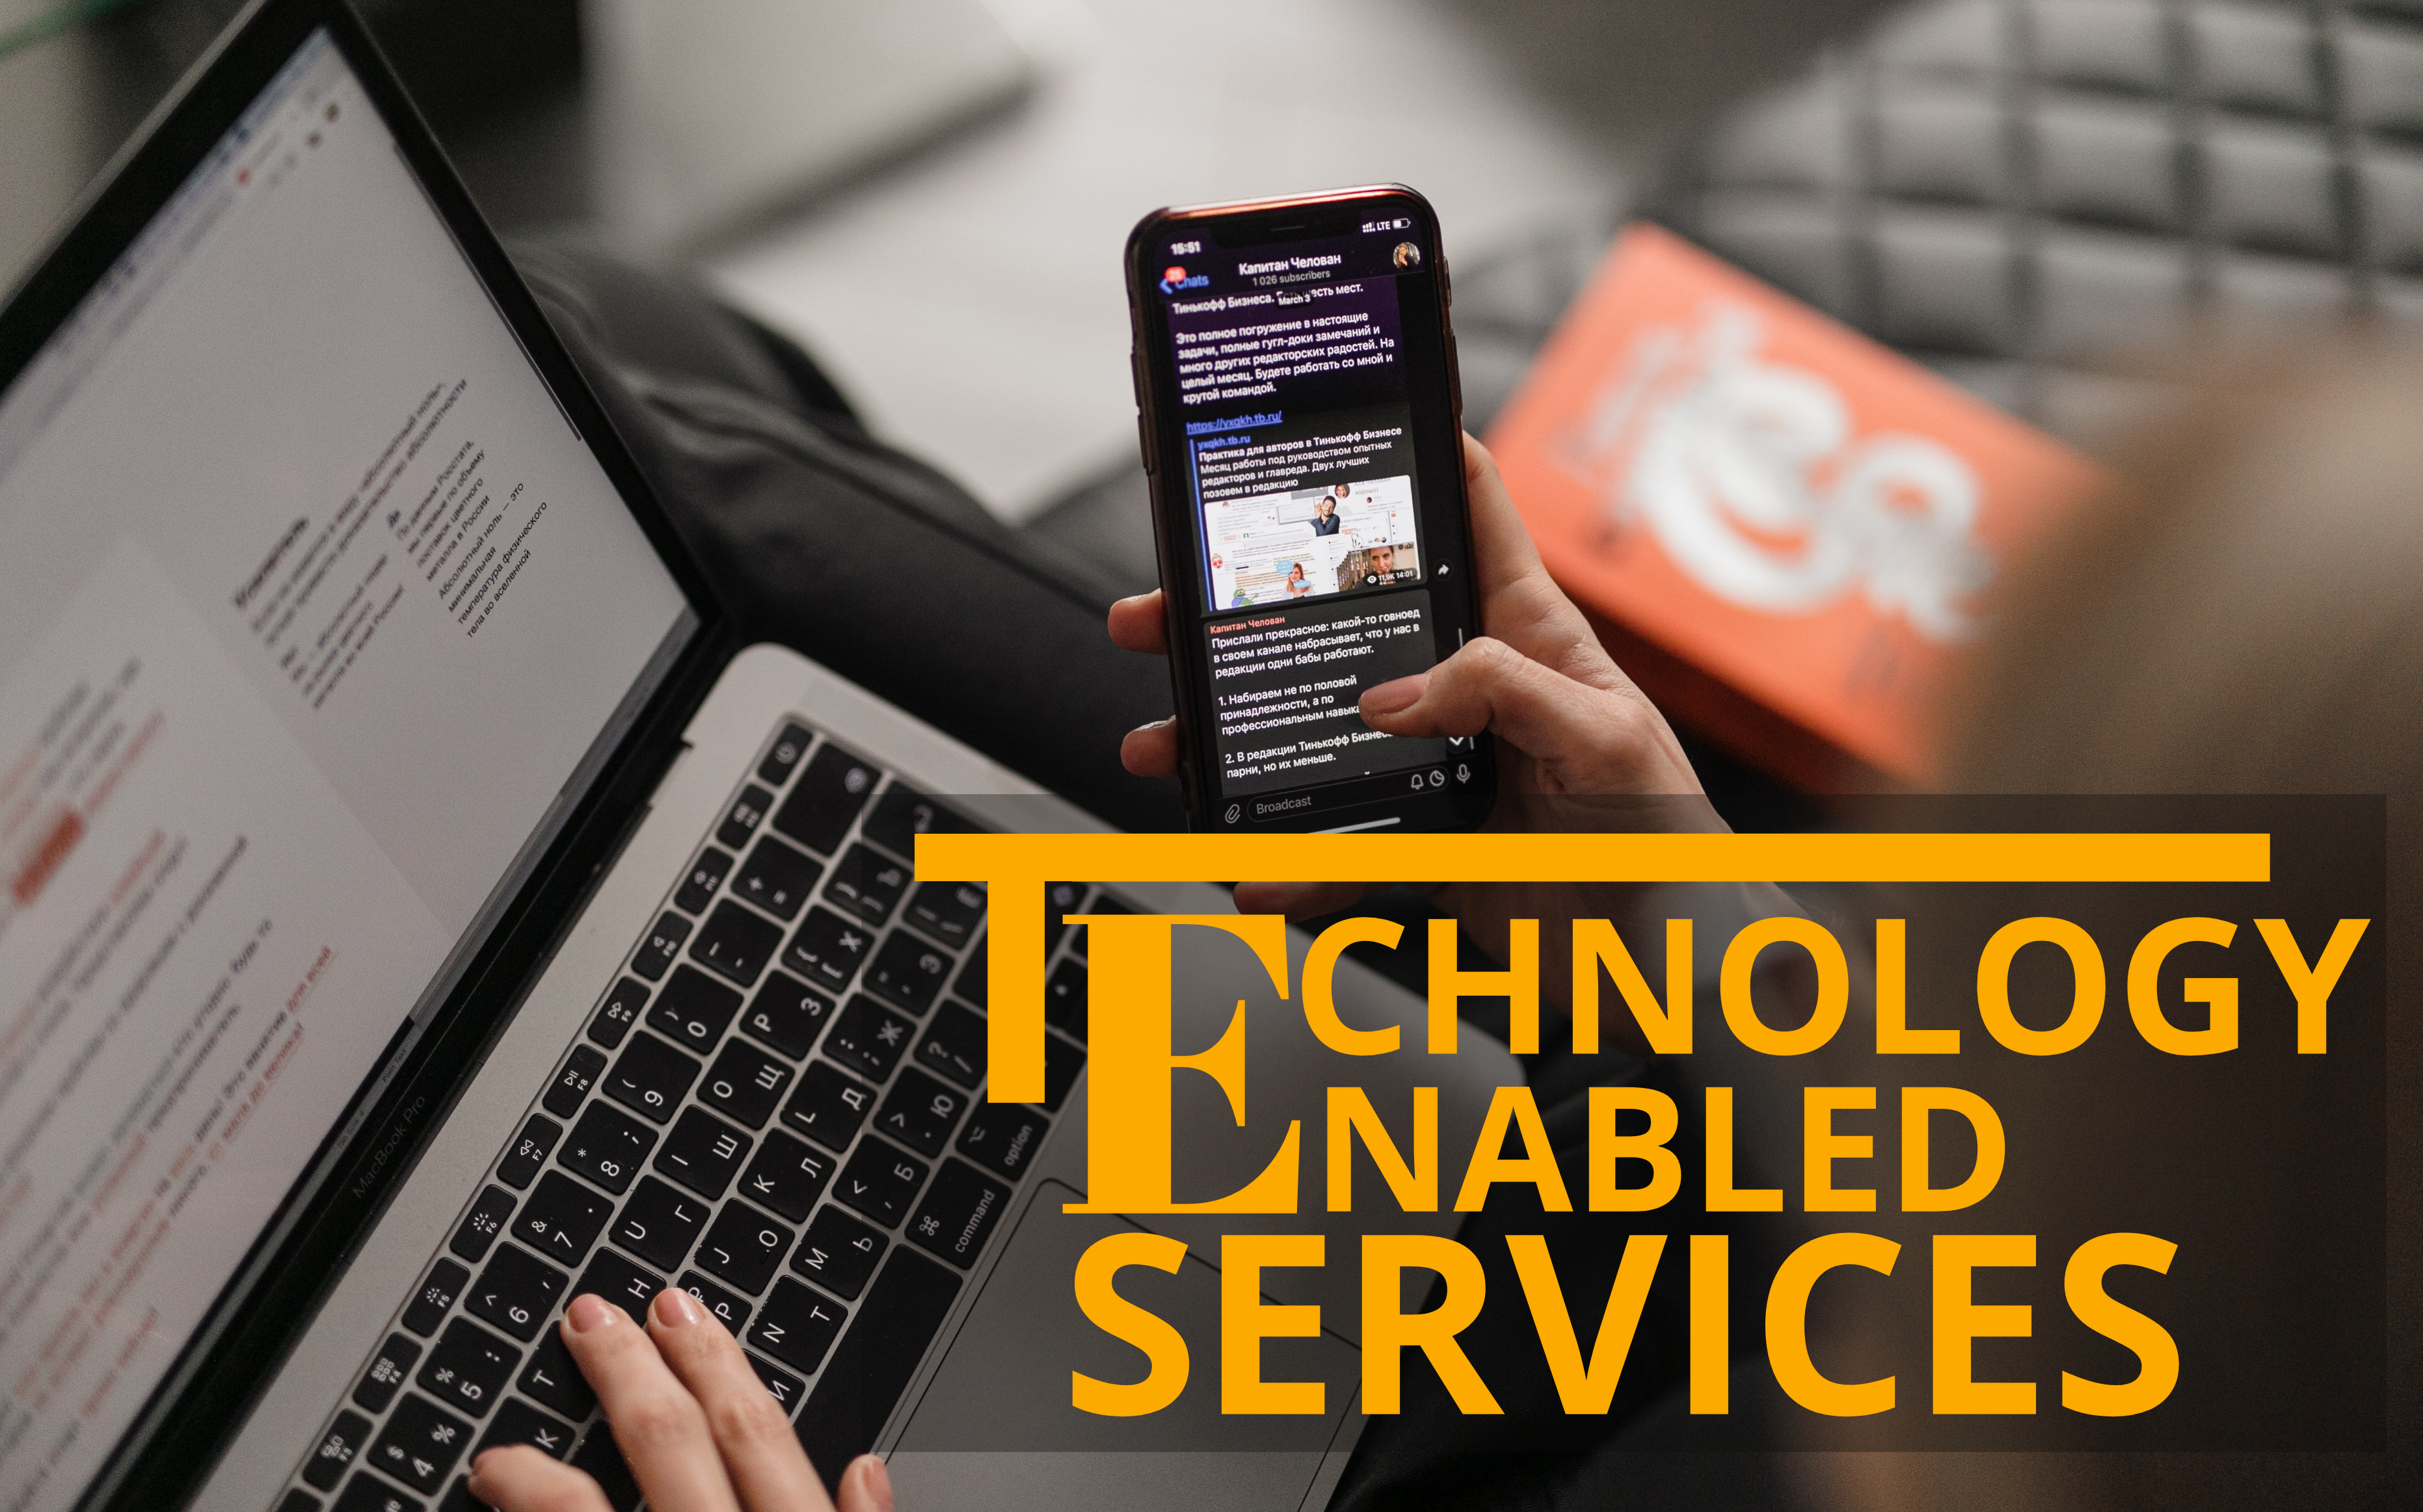 Information technology enabled services wikipedia, What is information technology enabled services, Information technology enabled services definition, Change healthcare technology enabled services llc, technology enabled services